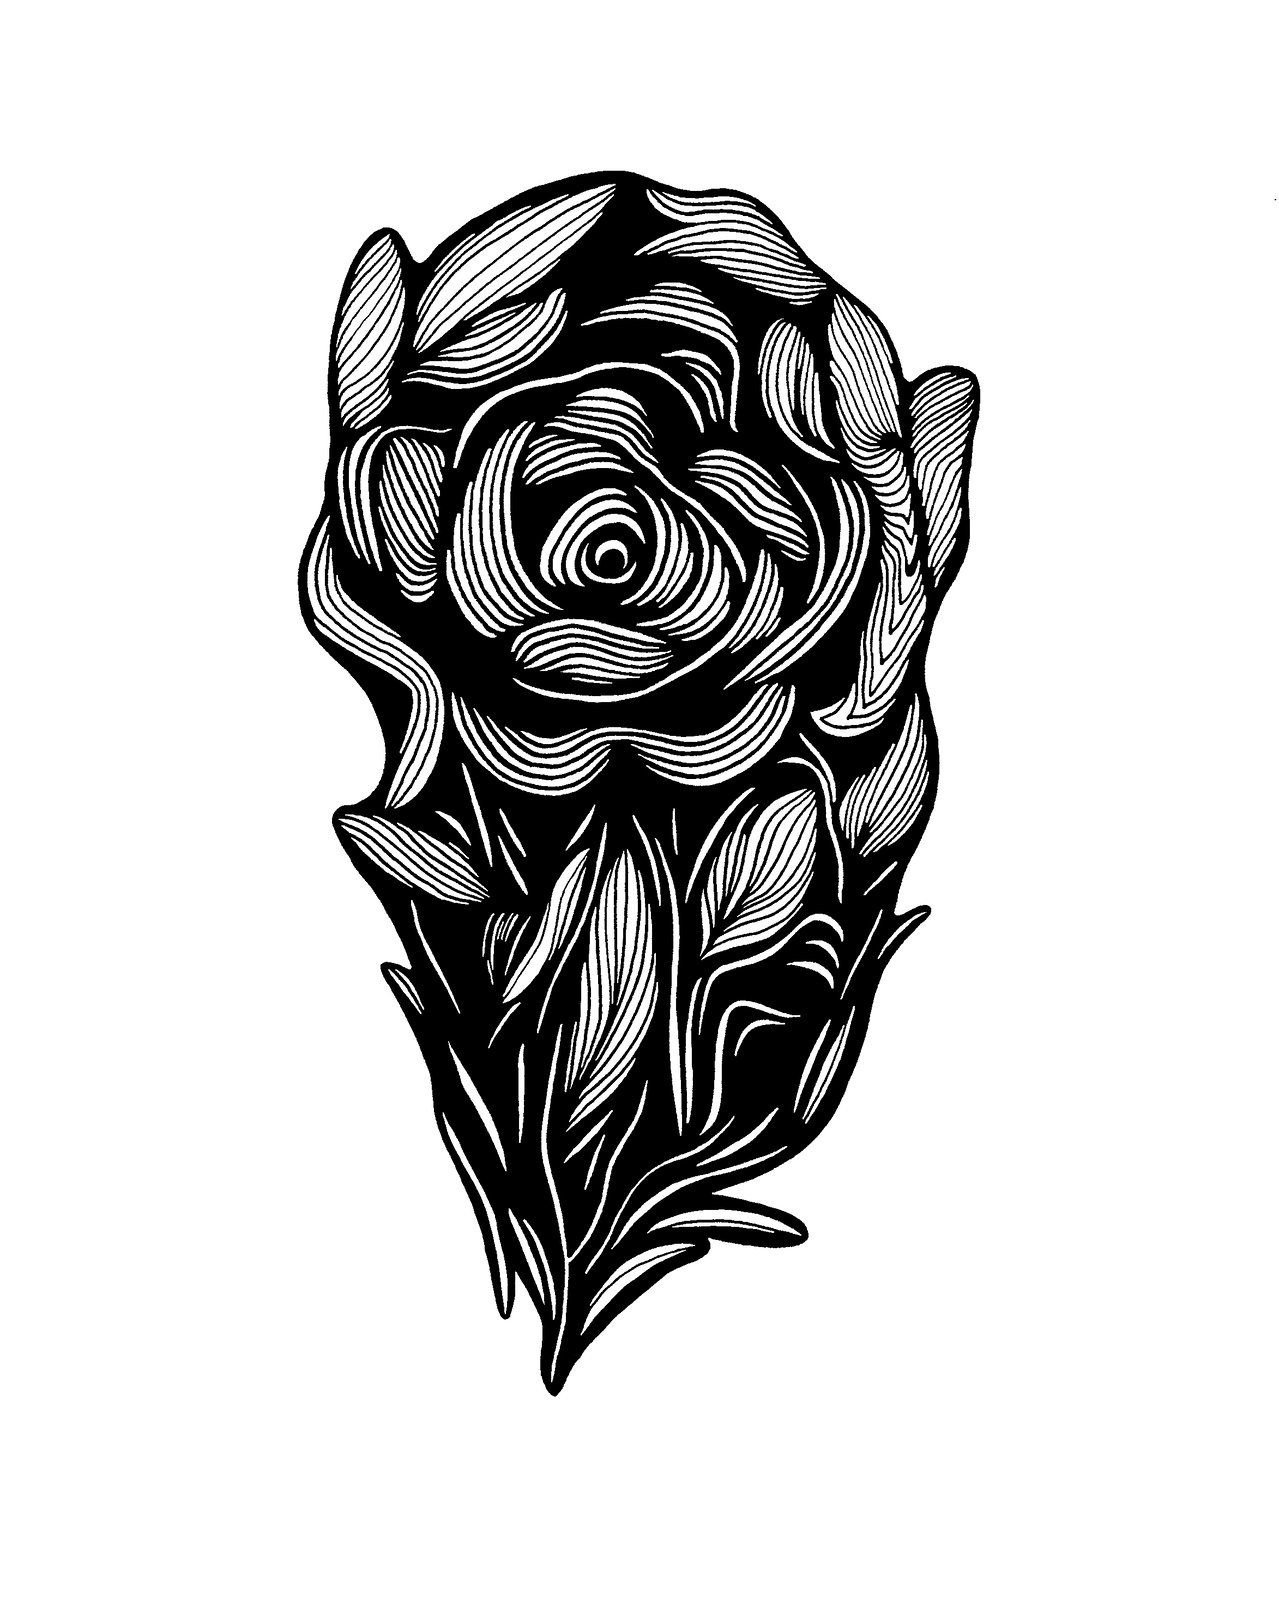 Rose With All Seeing Eye Tattoo Design Download High Resolution Digital Art  PNG Transparent Background Printable SVG Tattoo Stencil - Etsy Sweden